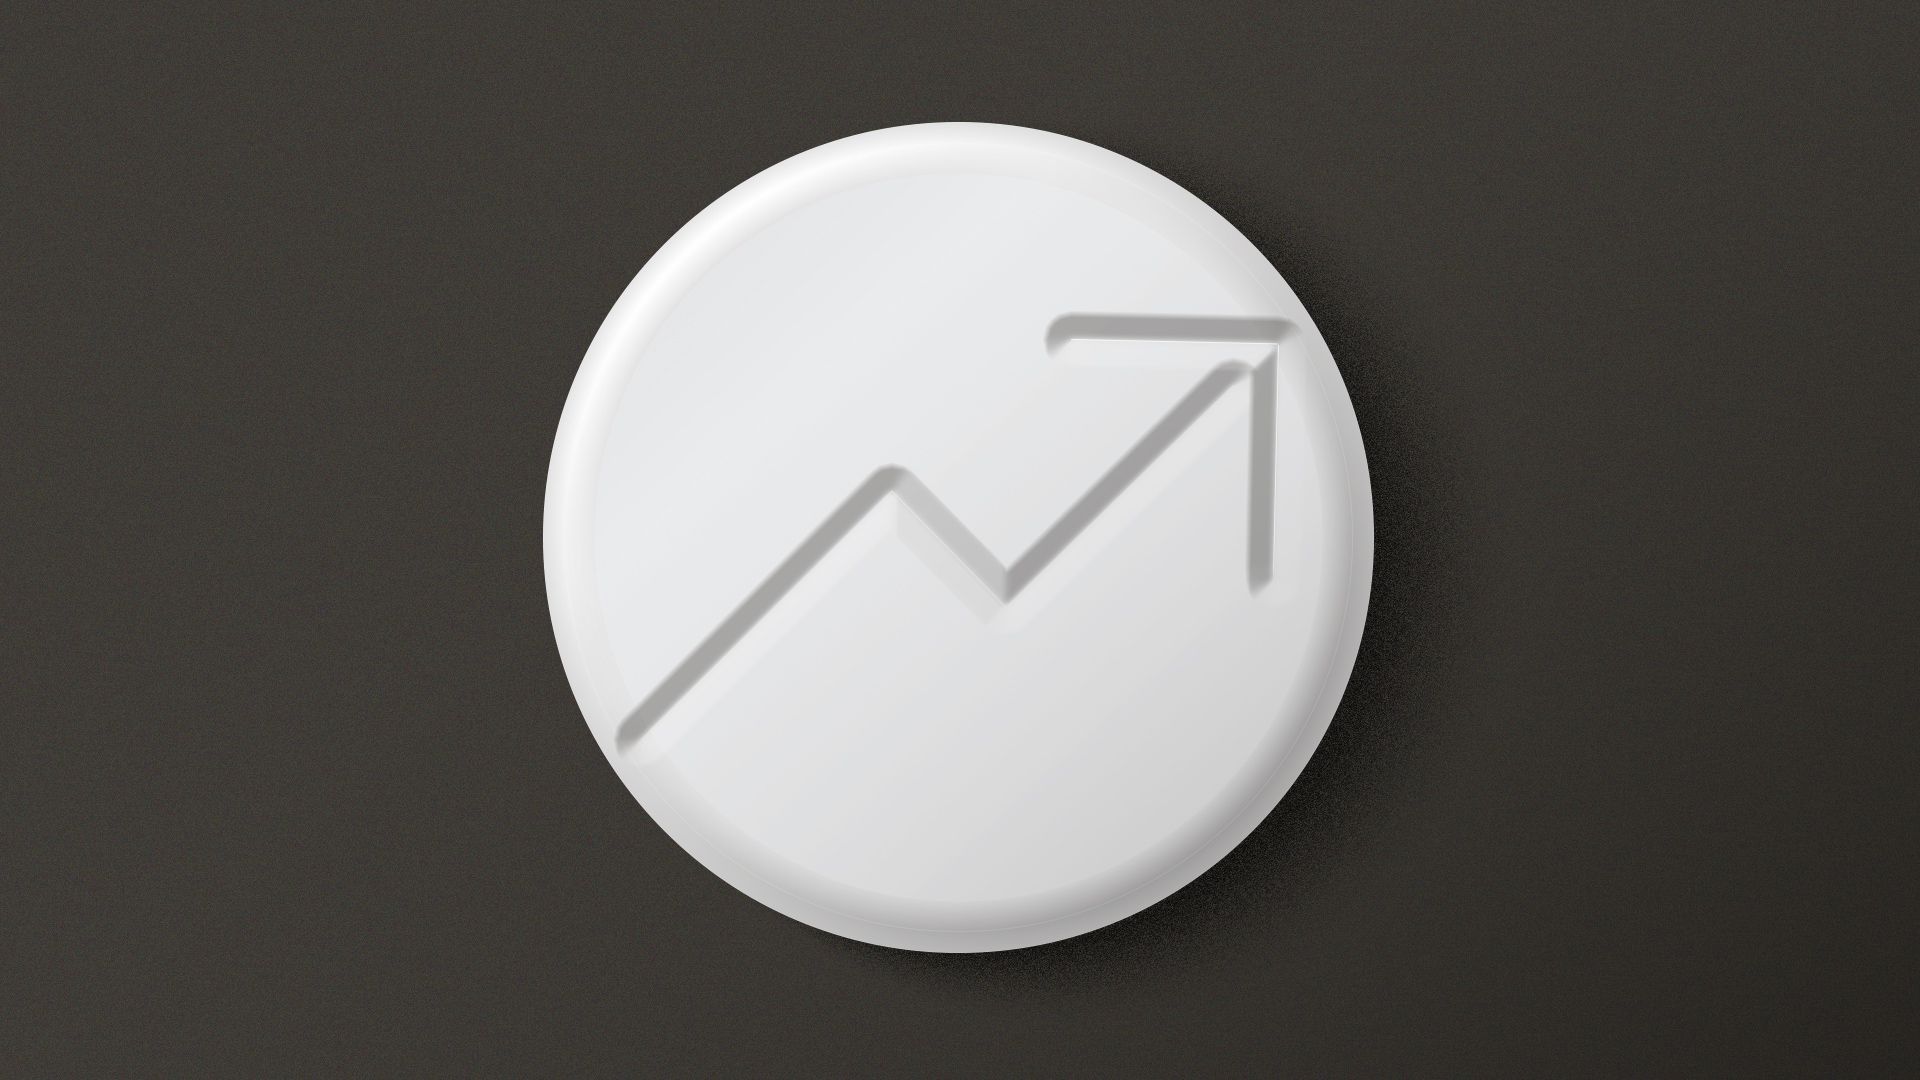 Illustration of the score line on a pill in the shape of an upward arrow instead of straight across.